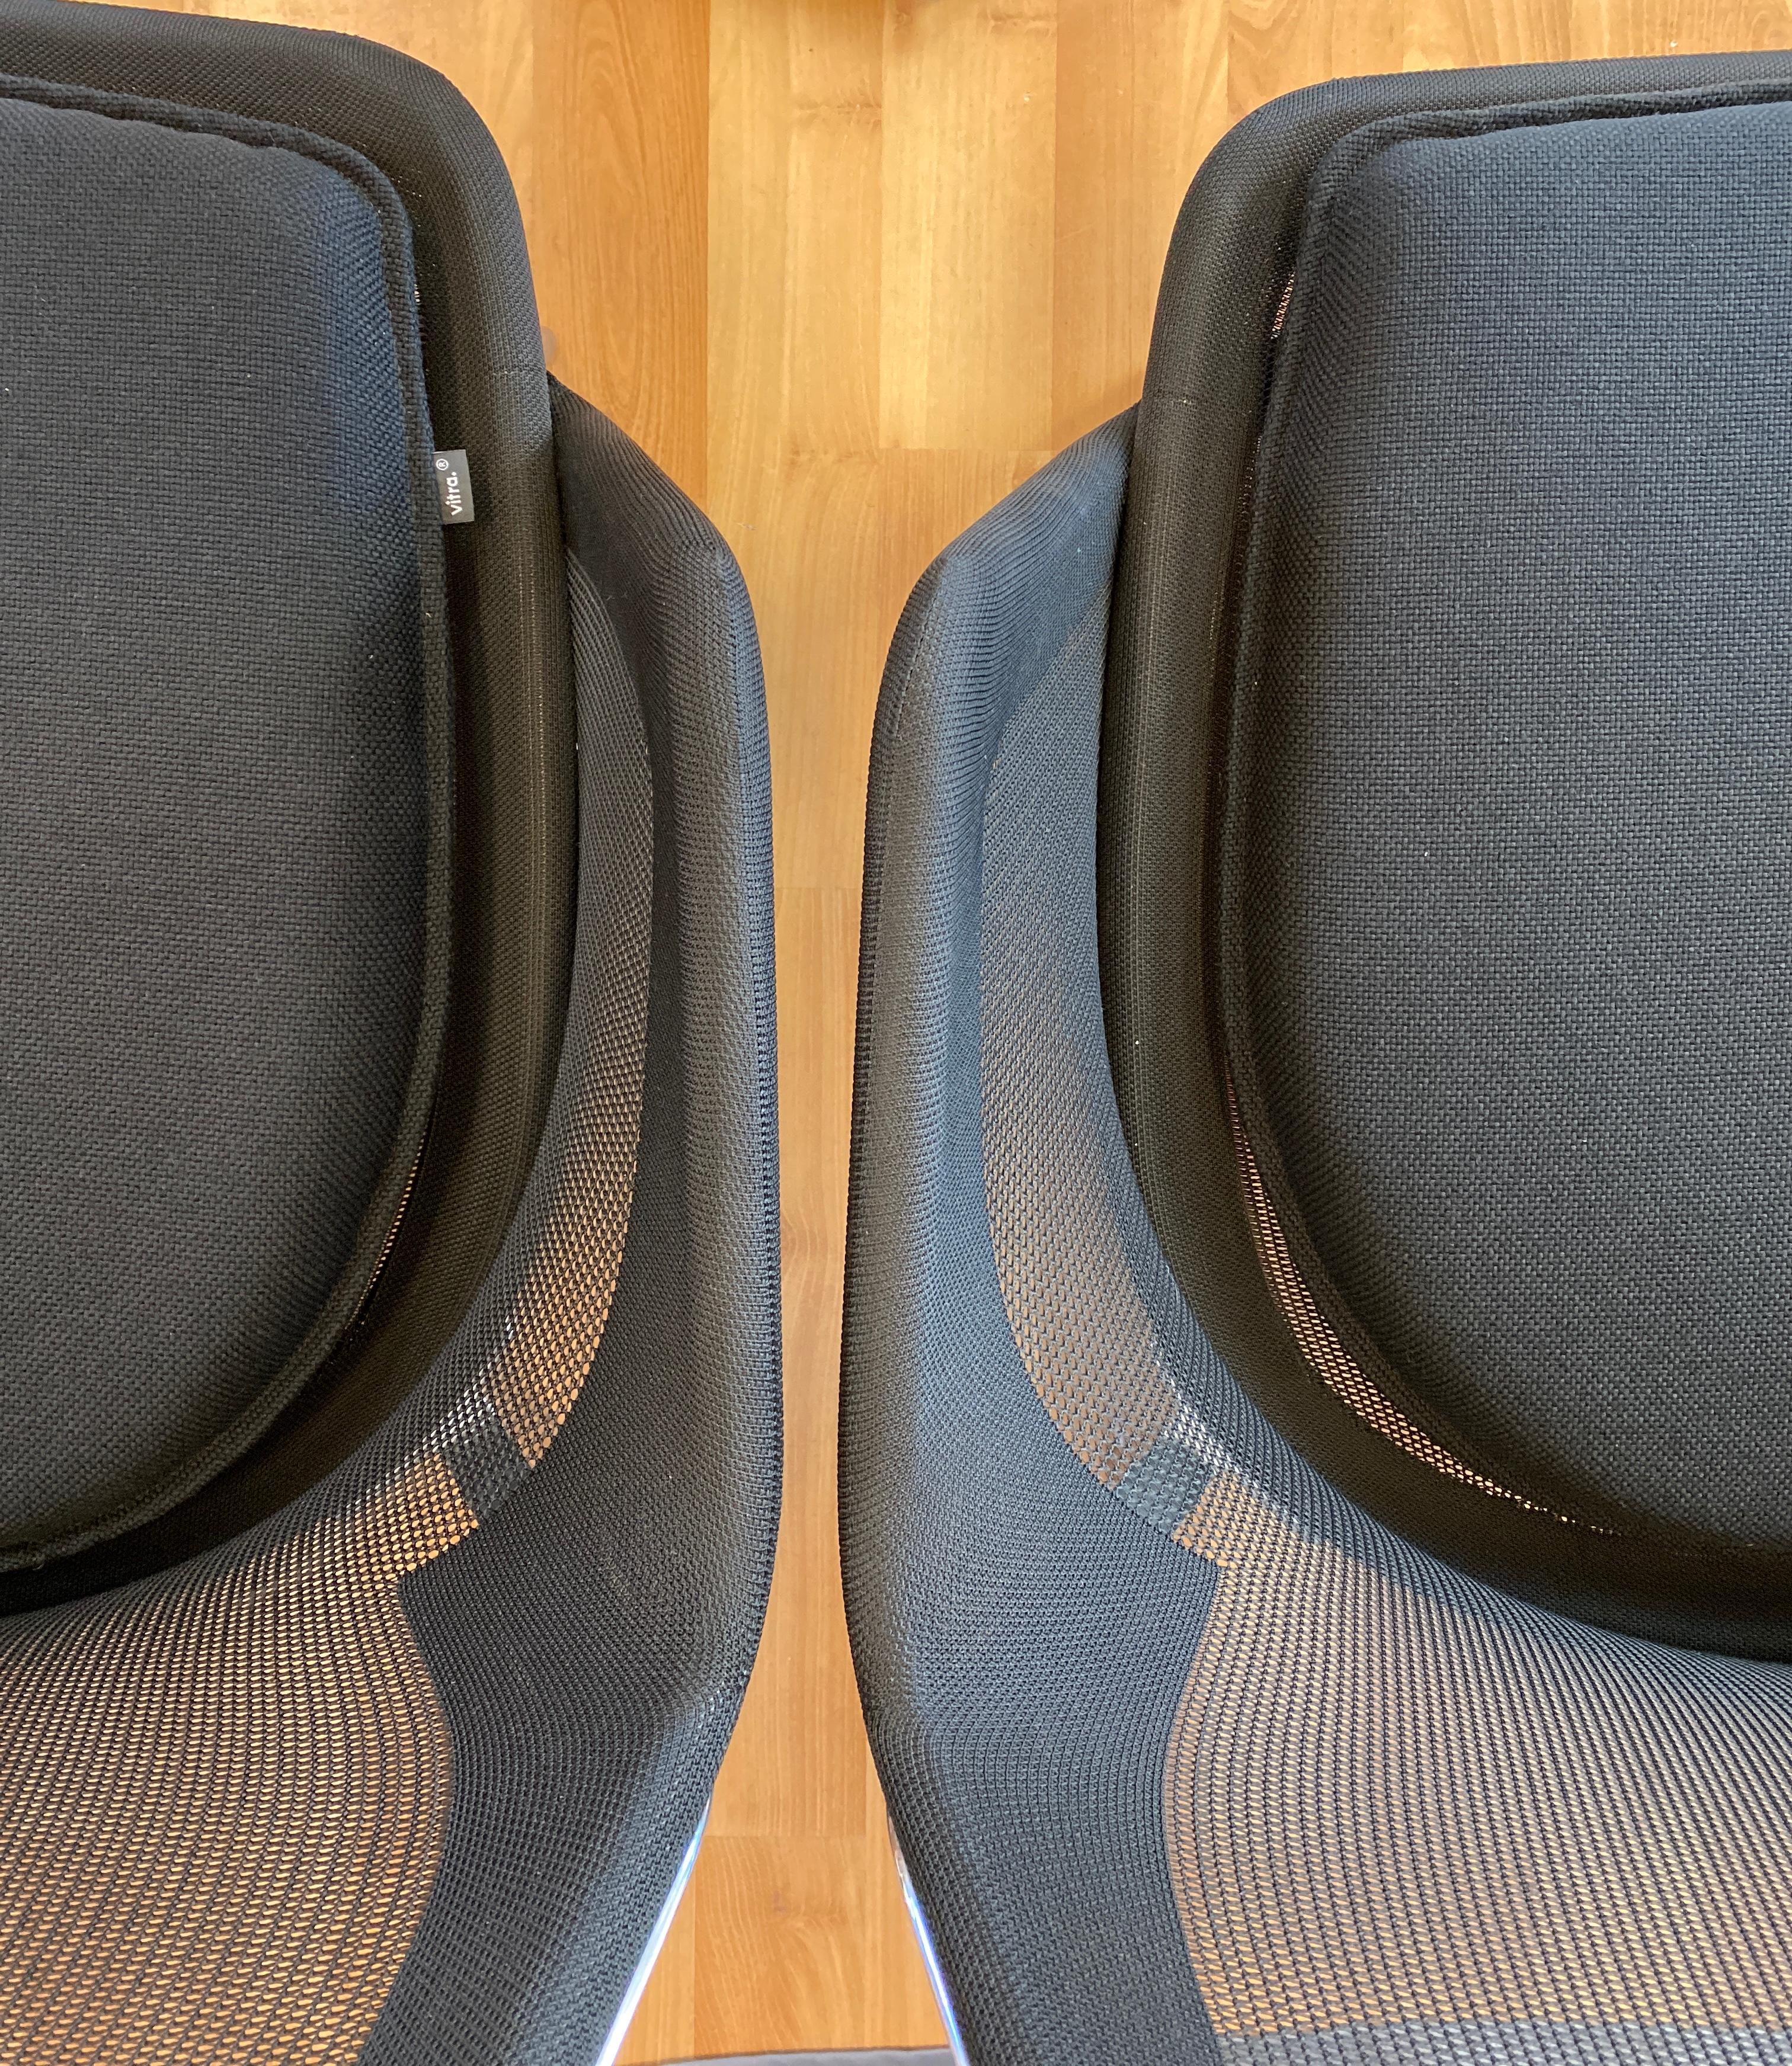 Contemporary Pair of Black Slow Chairs by Ronan and Erwan Bouroullec for Vitra